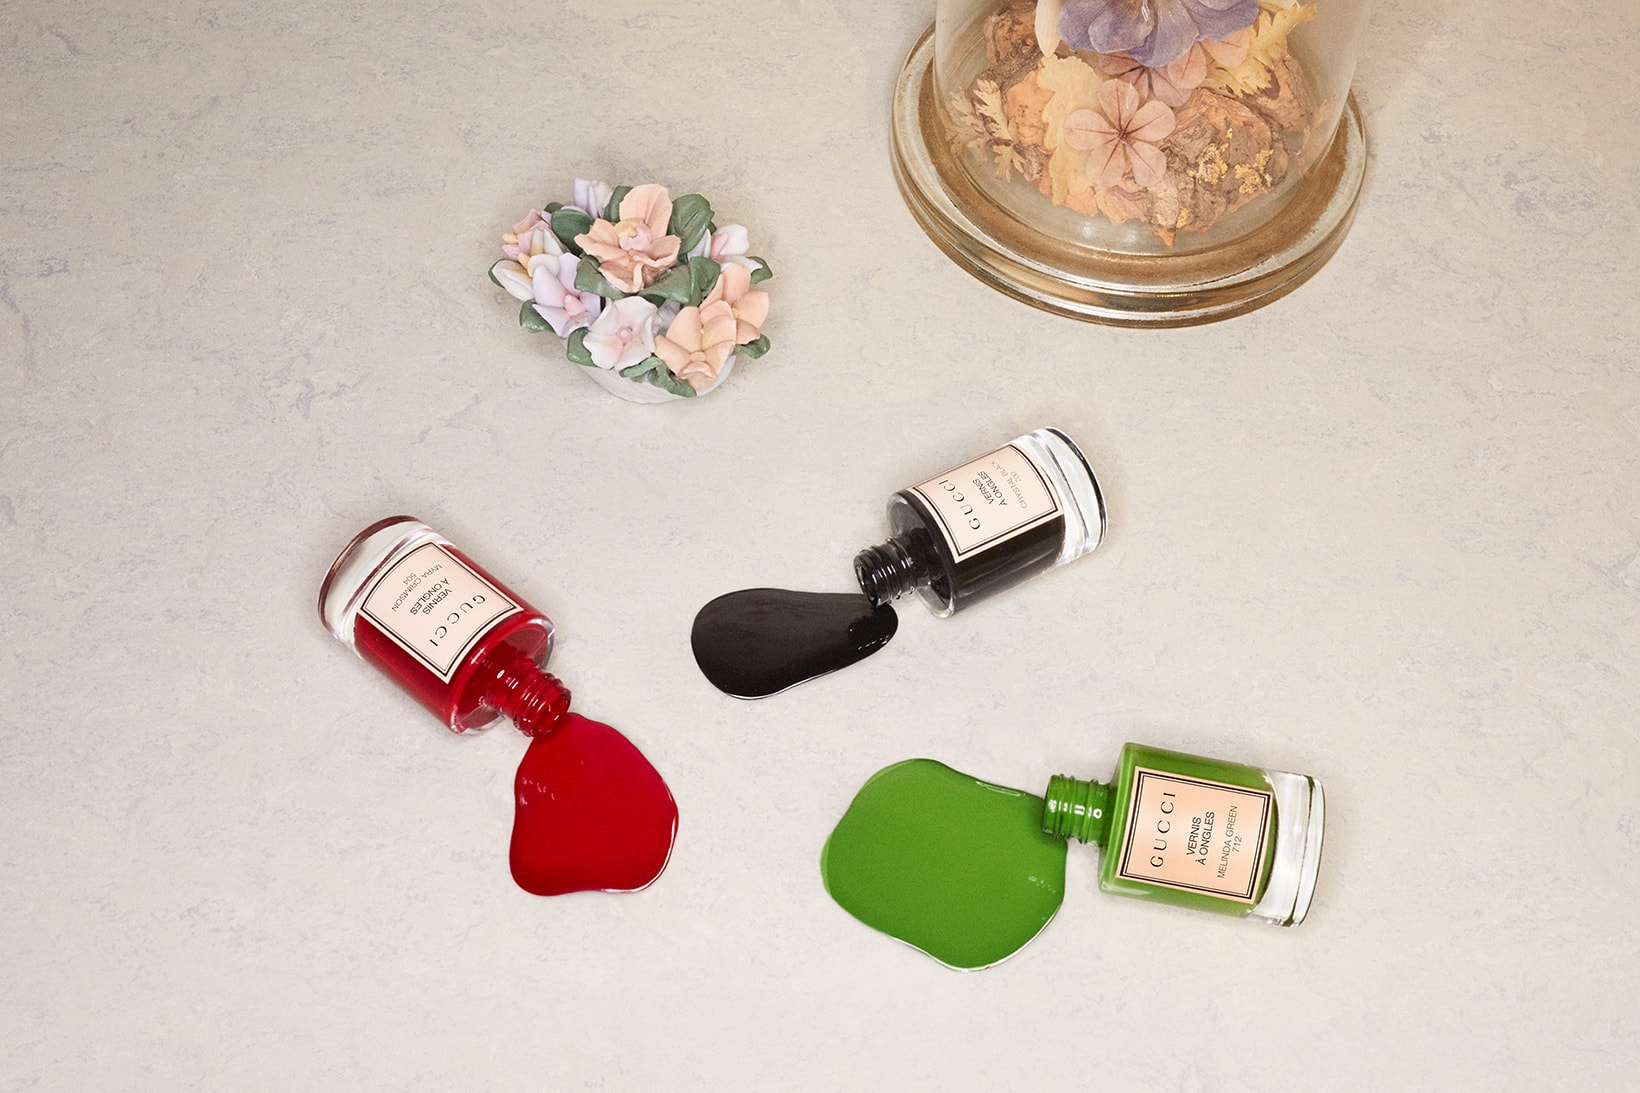 gucci beauty summer collection nail polish bronzer makeup alessandro michele